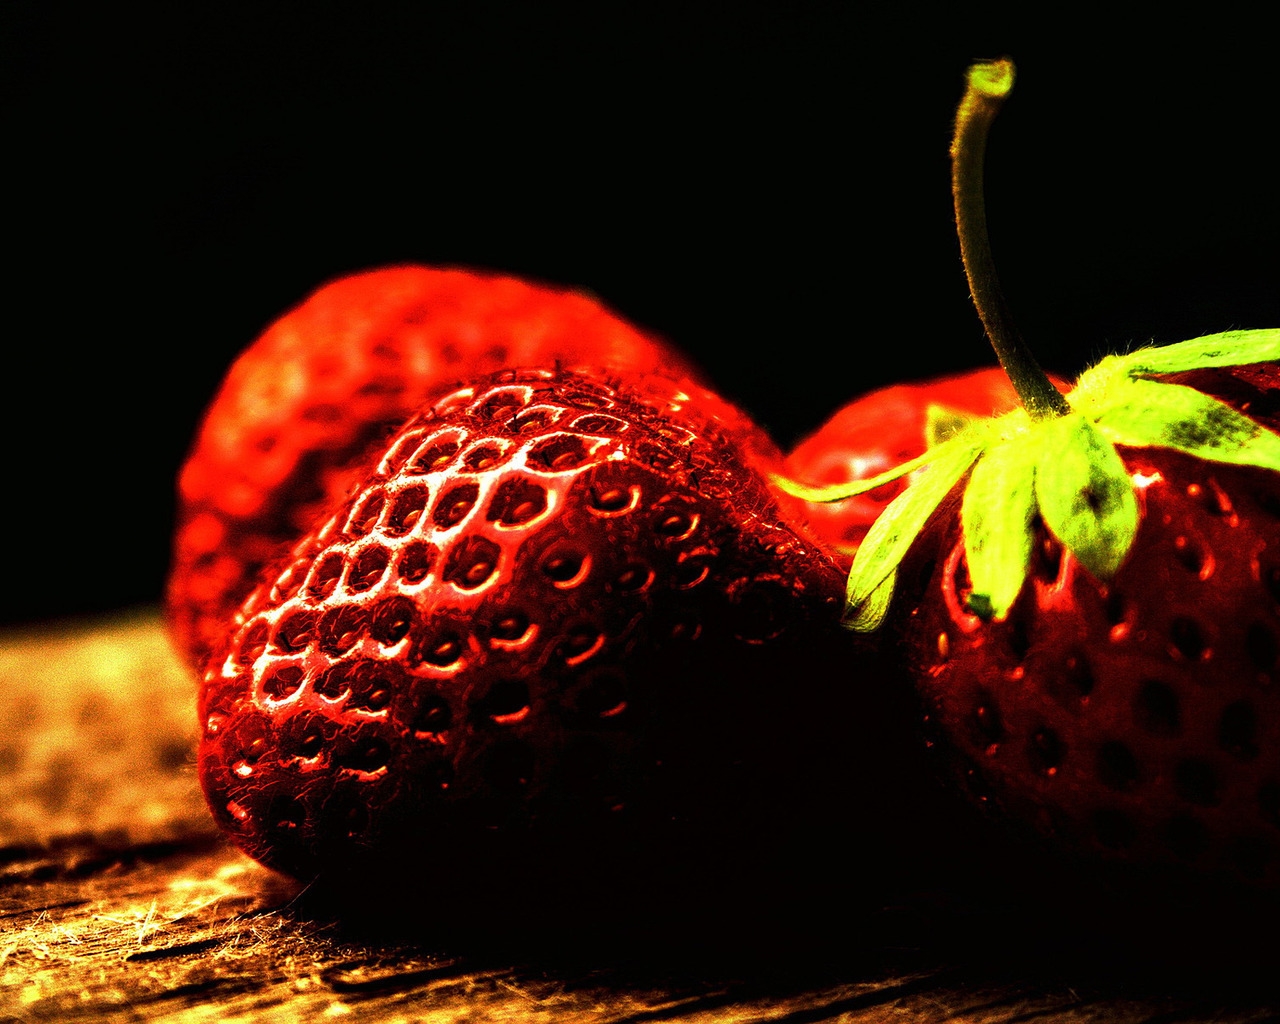 Two ripe strawberries for 1280 x 1024 resolution